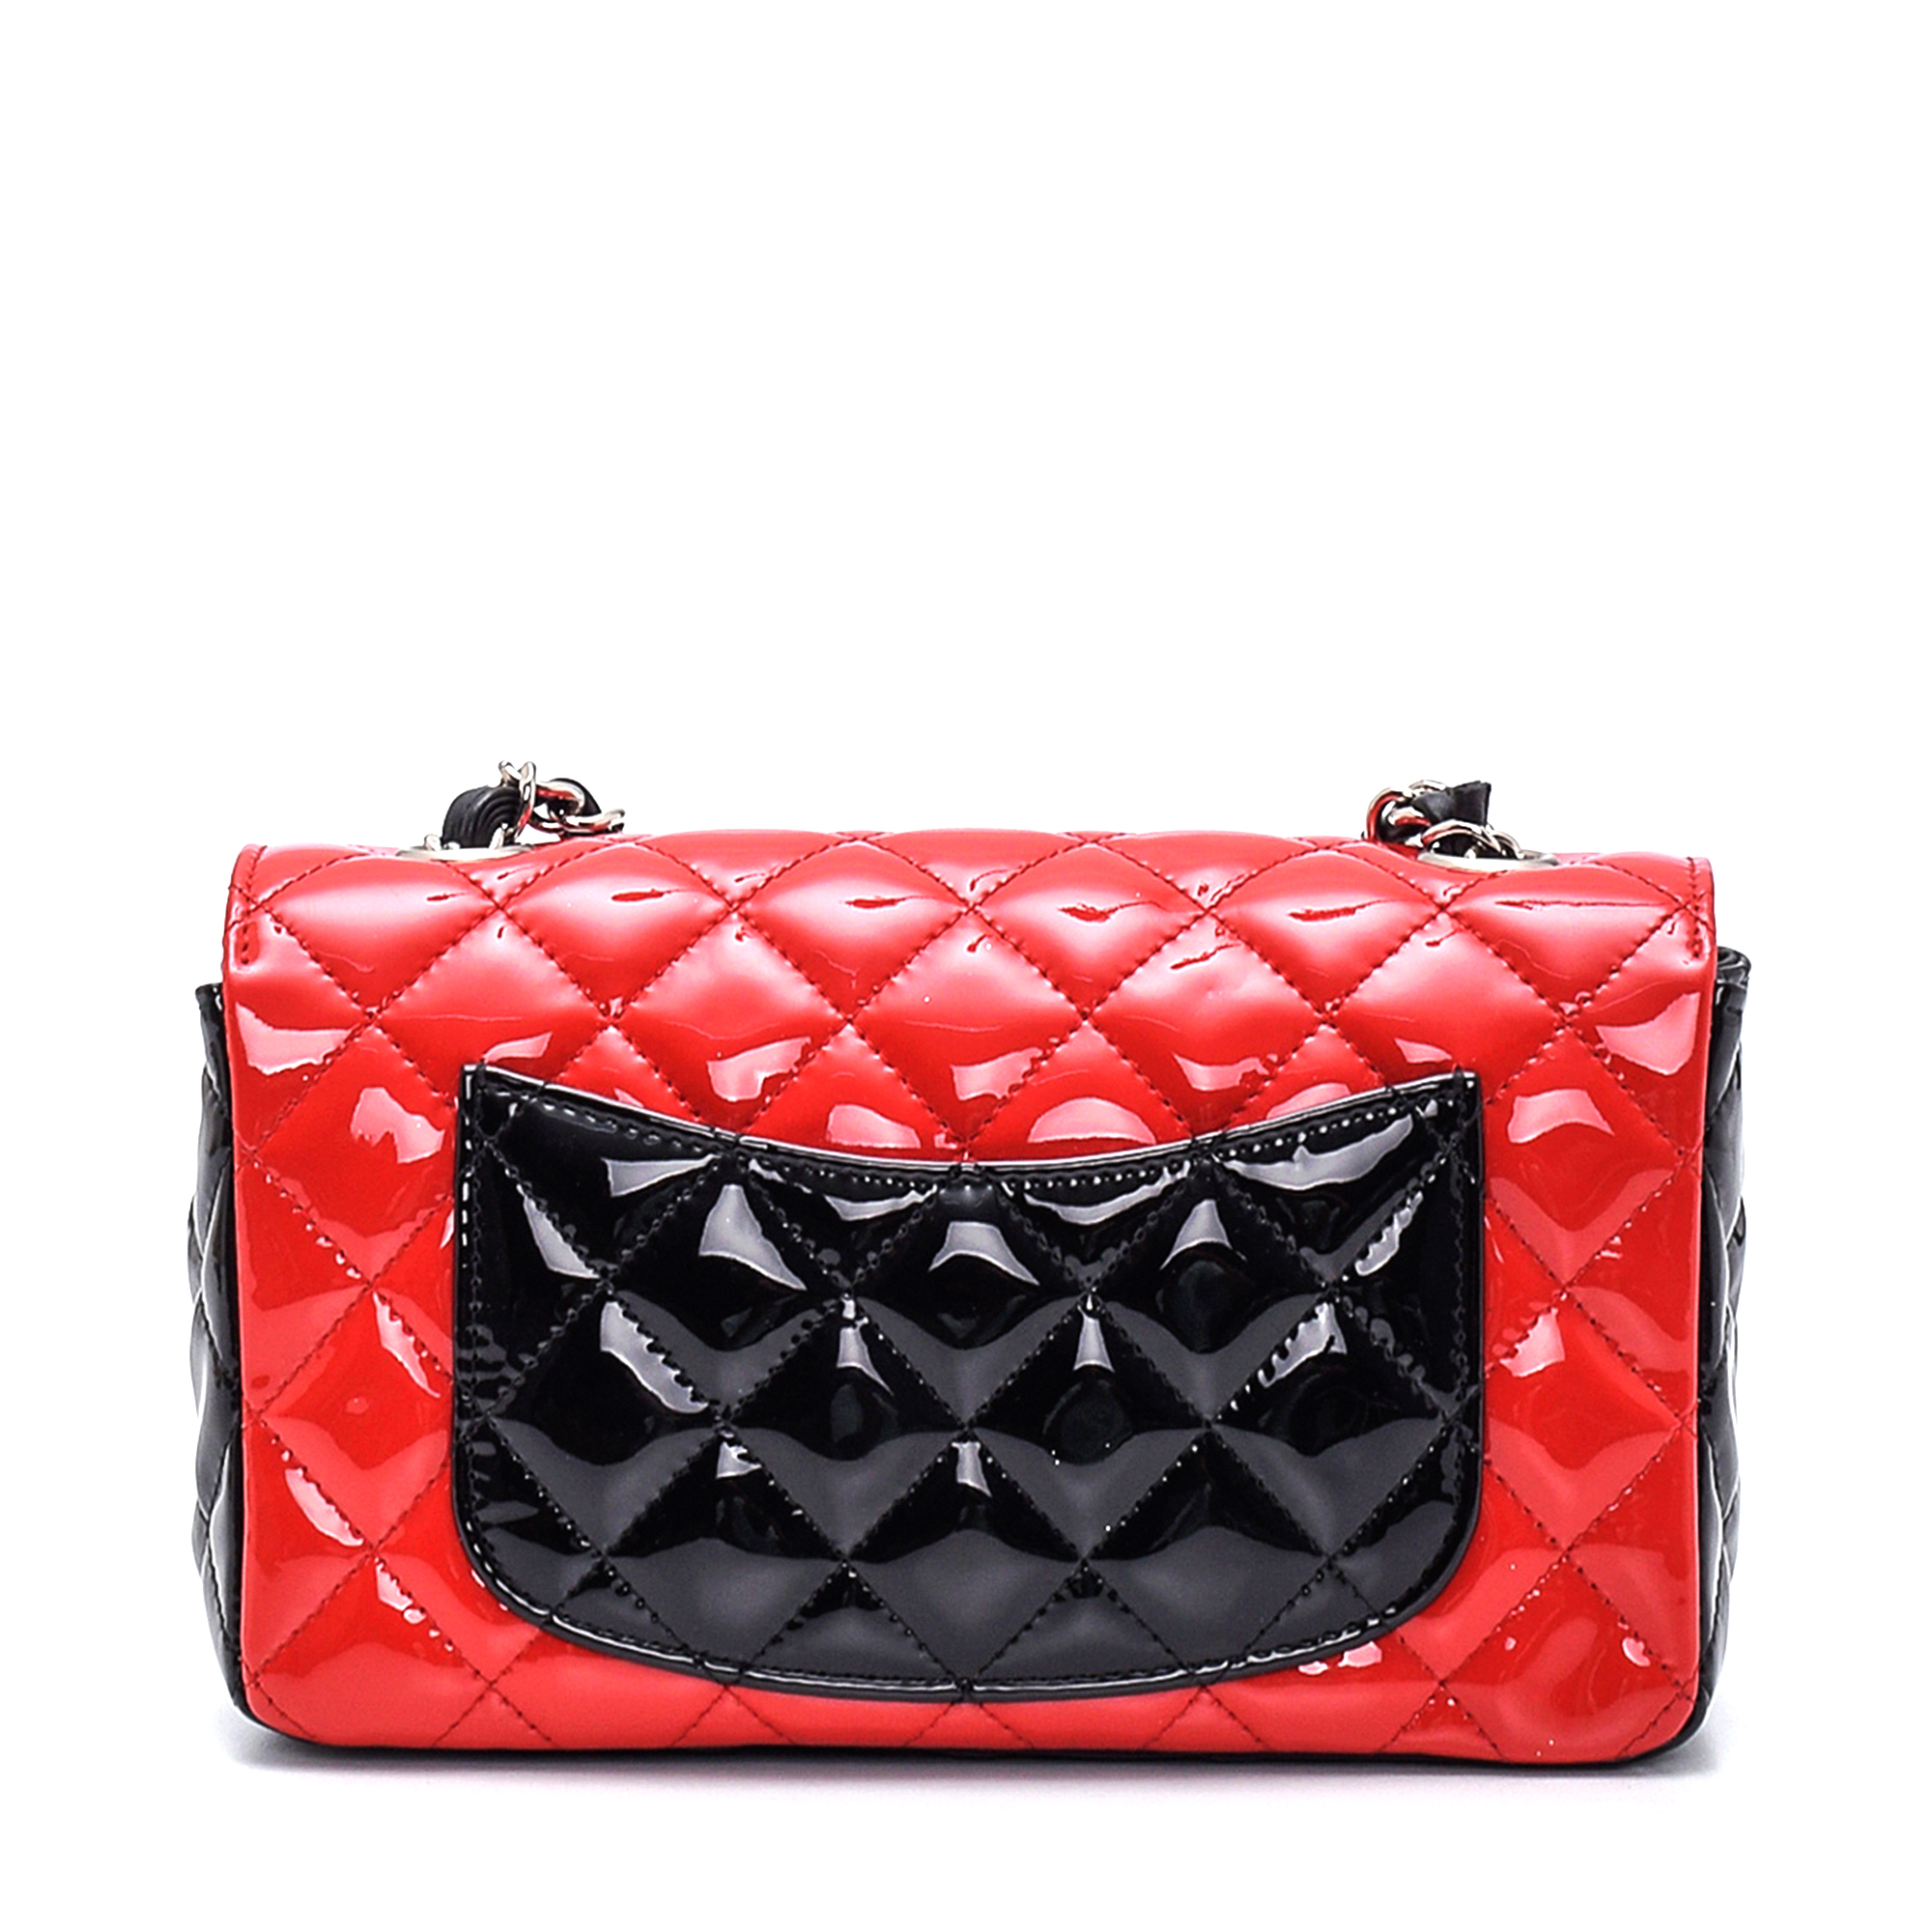 Chanel - Black & Red Quilted Patent Leather Small Flap Bag